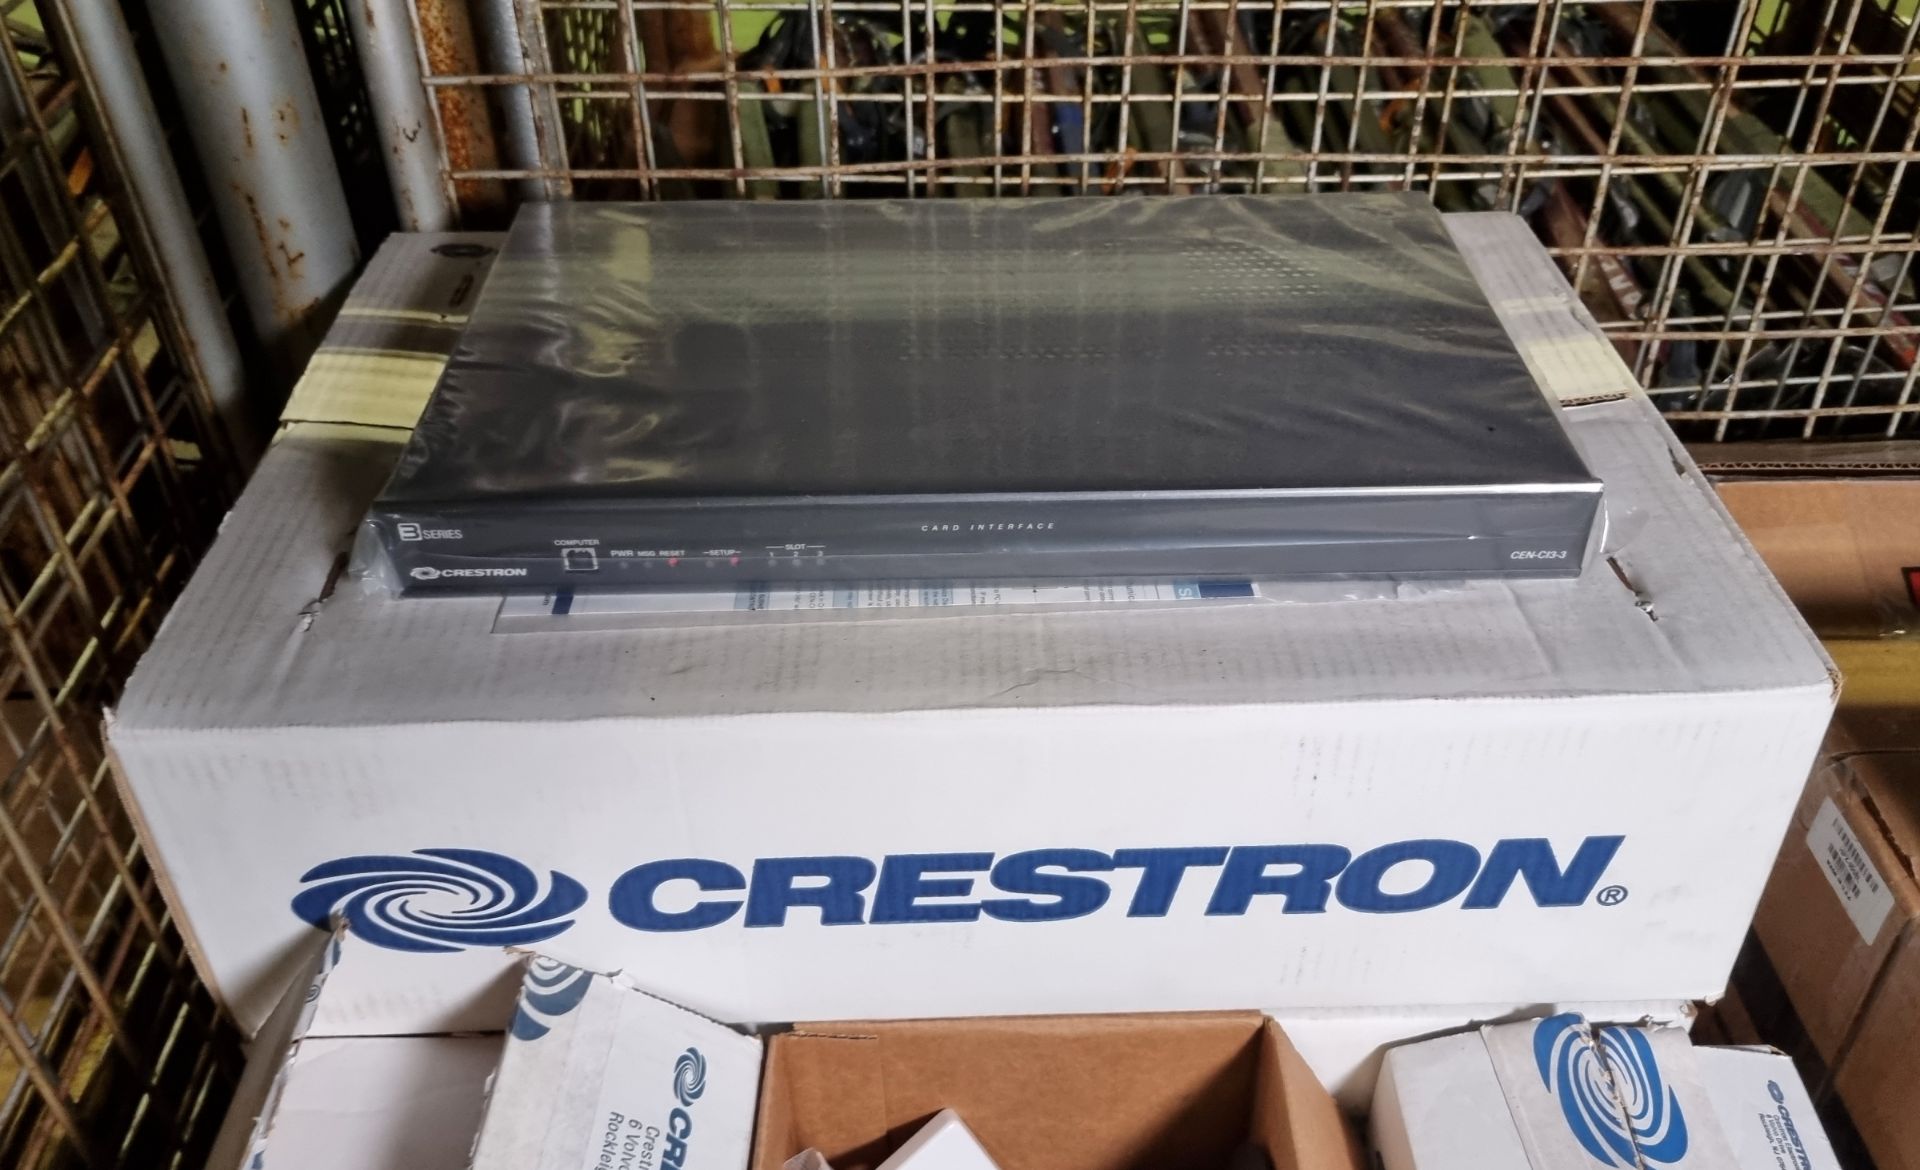 2x Crestron TST-902-DS wireless touch screen docking stations & more - see desc. - Image 5 of 7